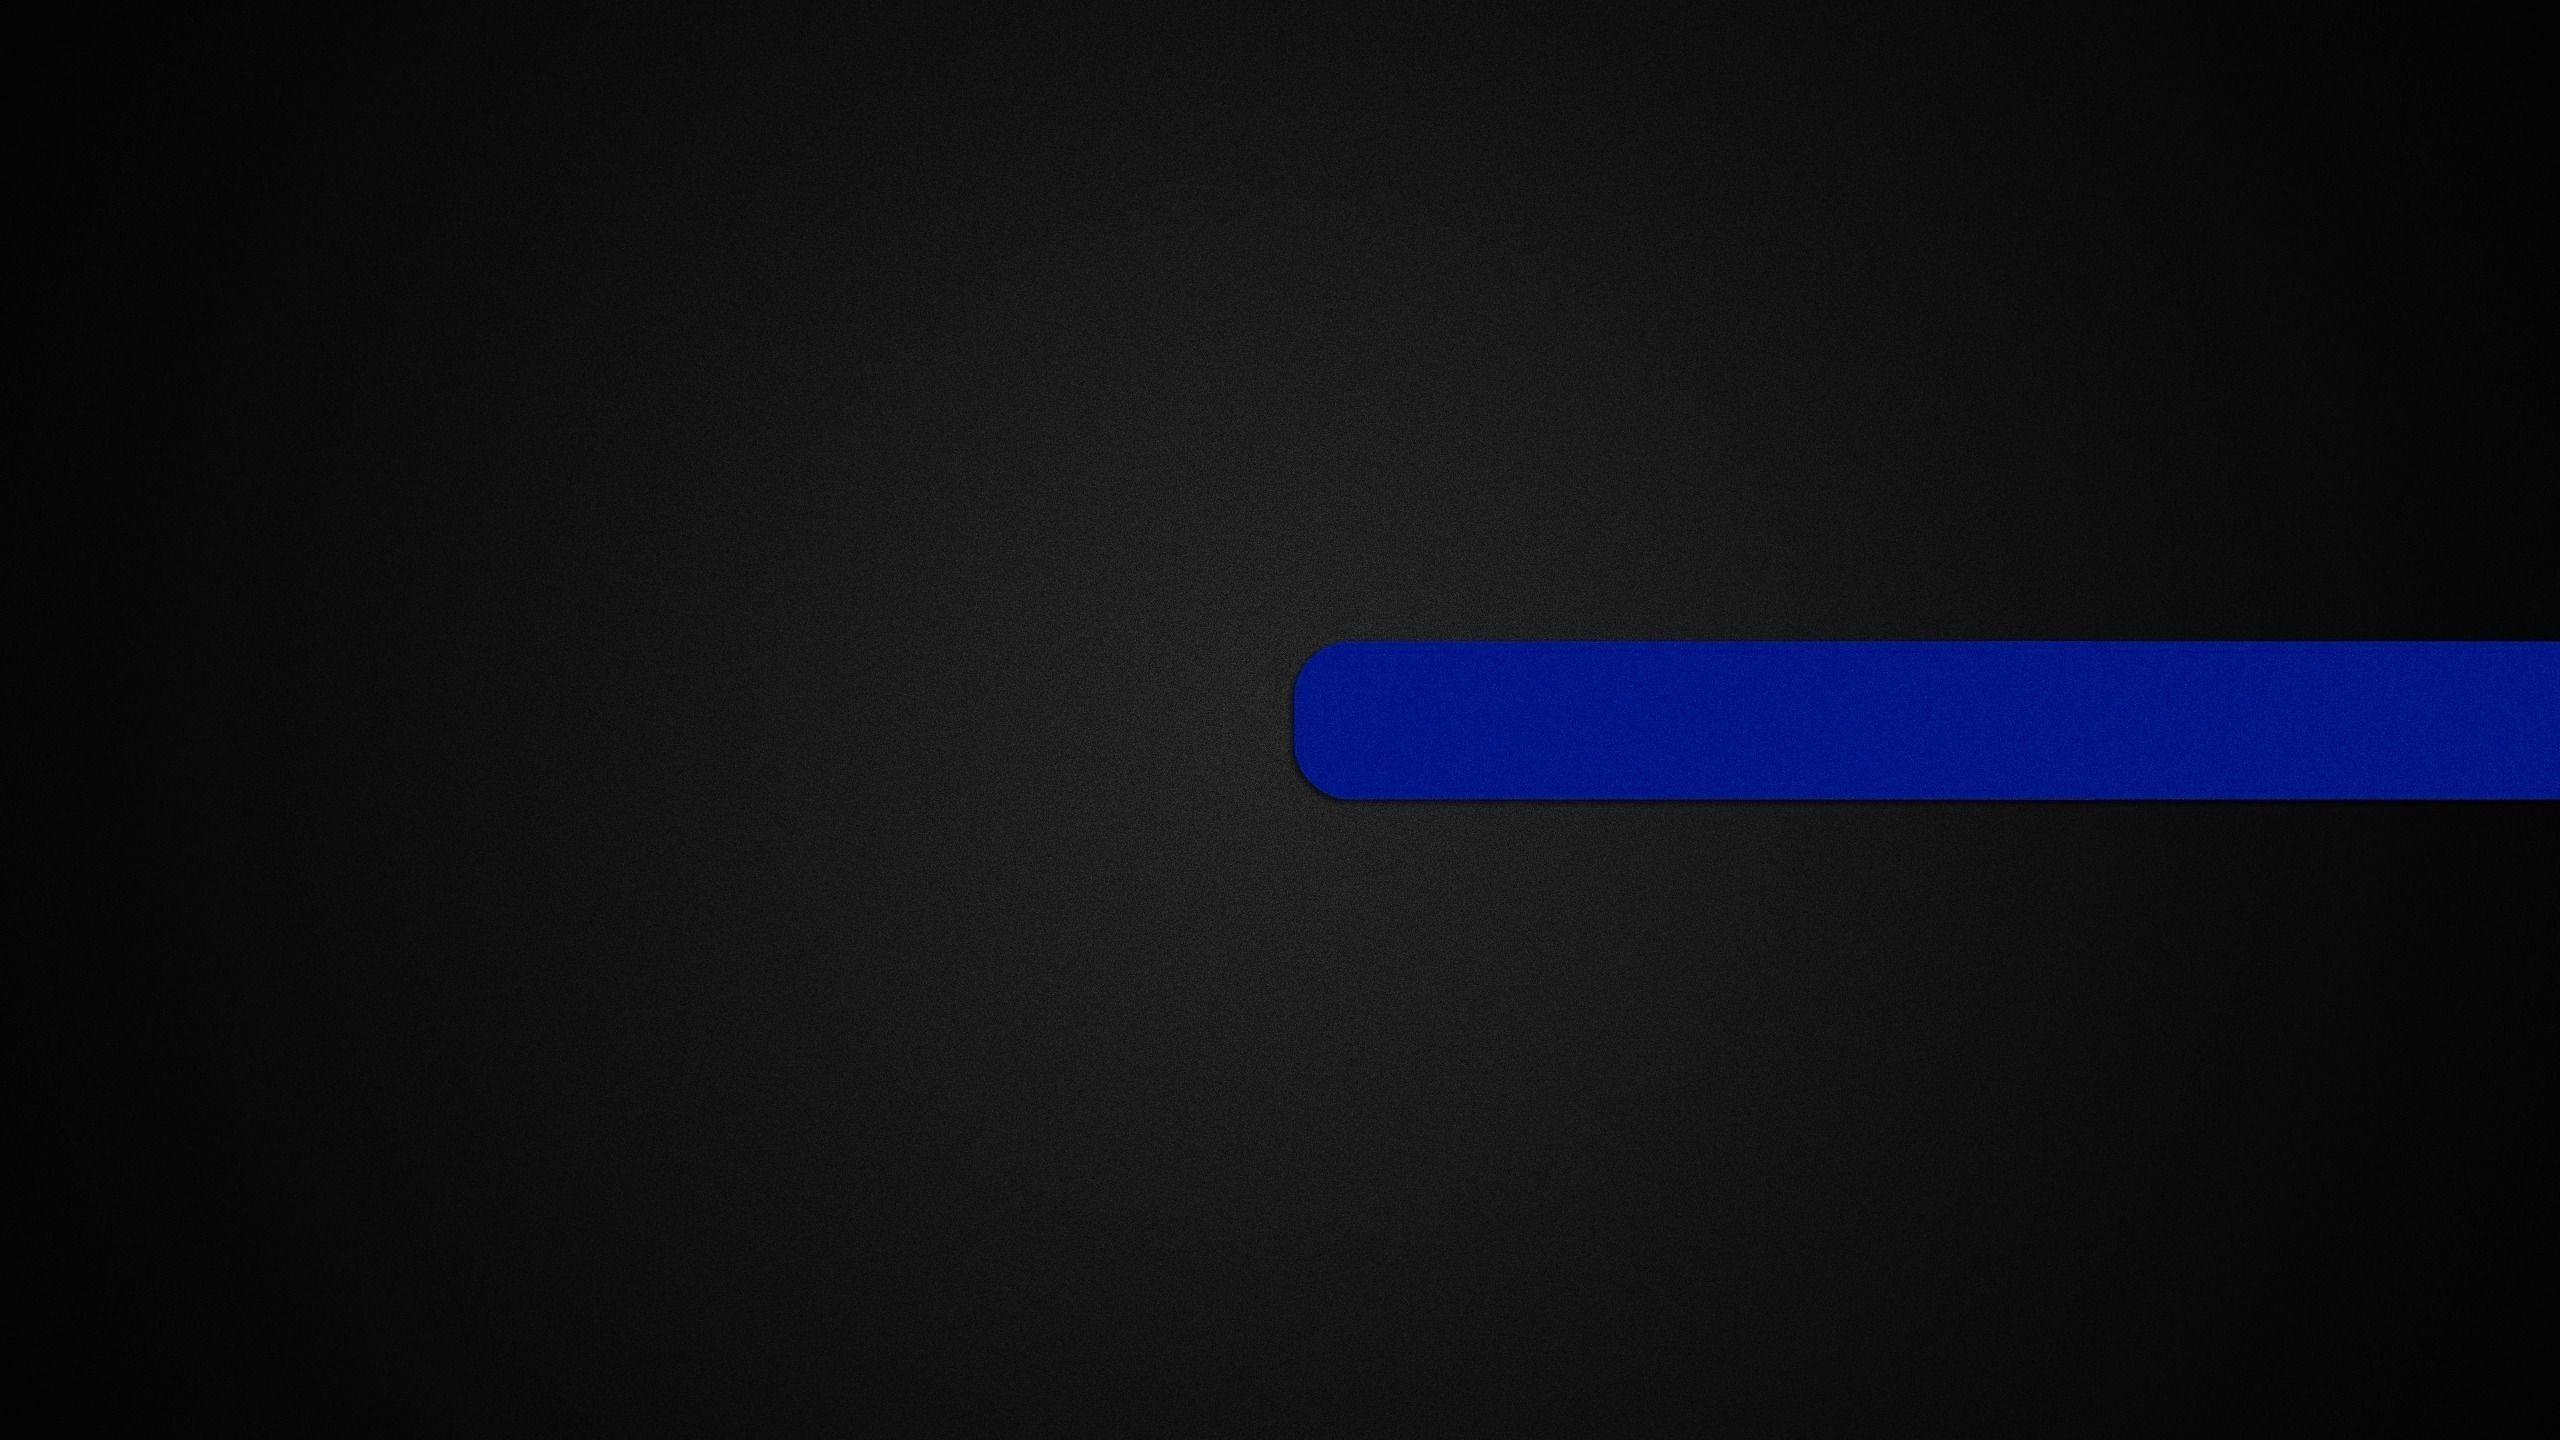 Background, Black, Blue, Abstract, Wallpaper, Image